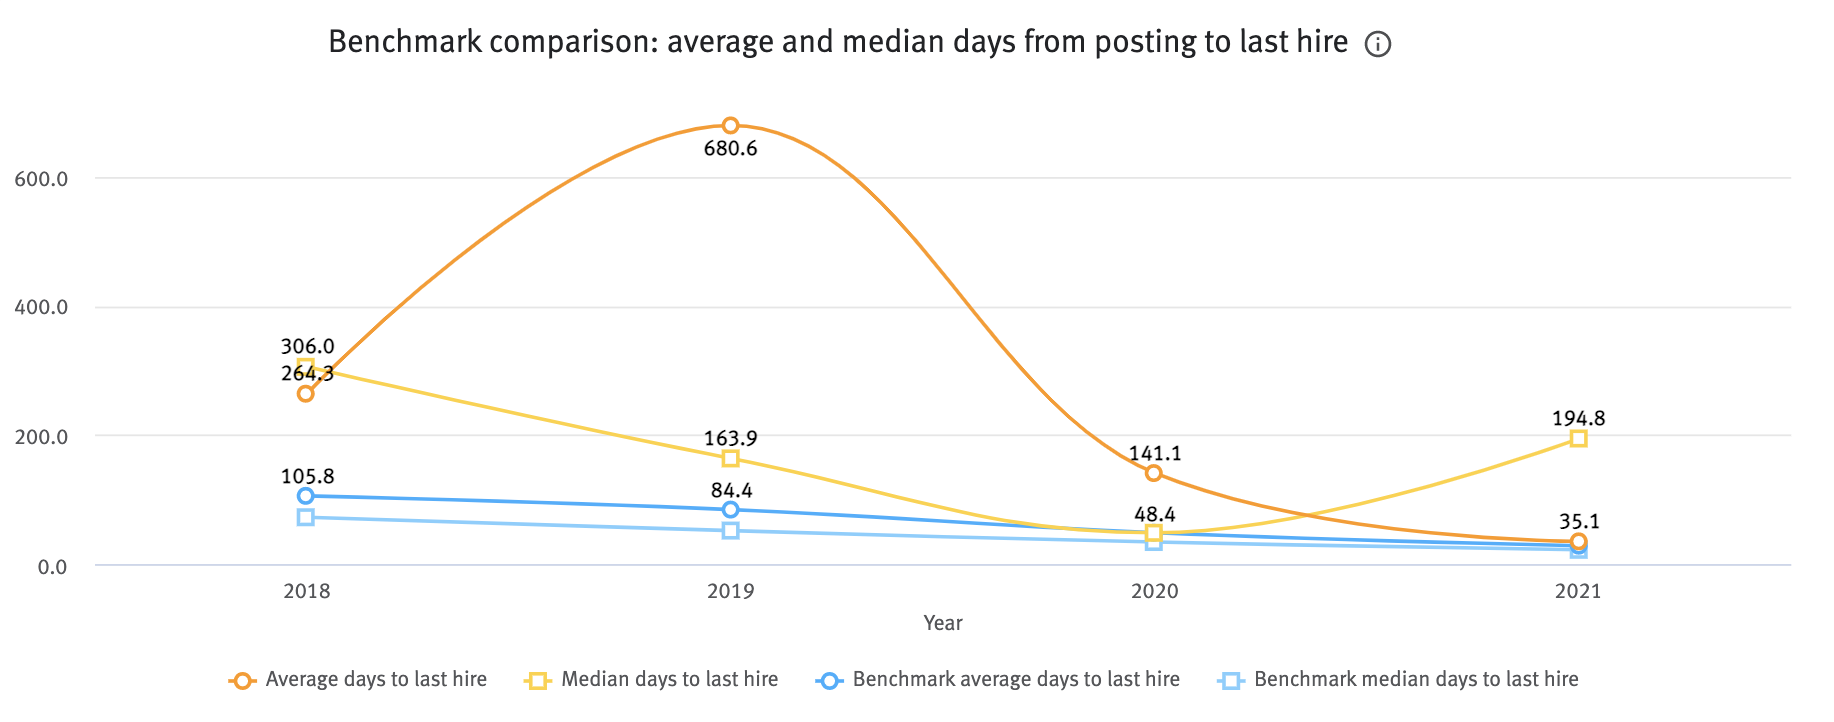 Benchmark comparison average and median days from posting to last hire chart